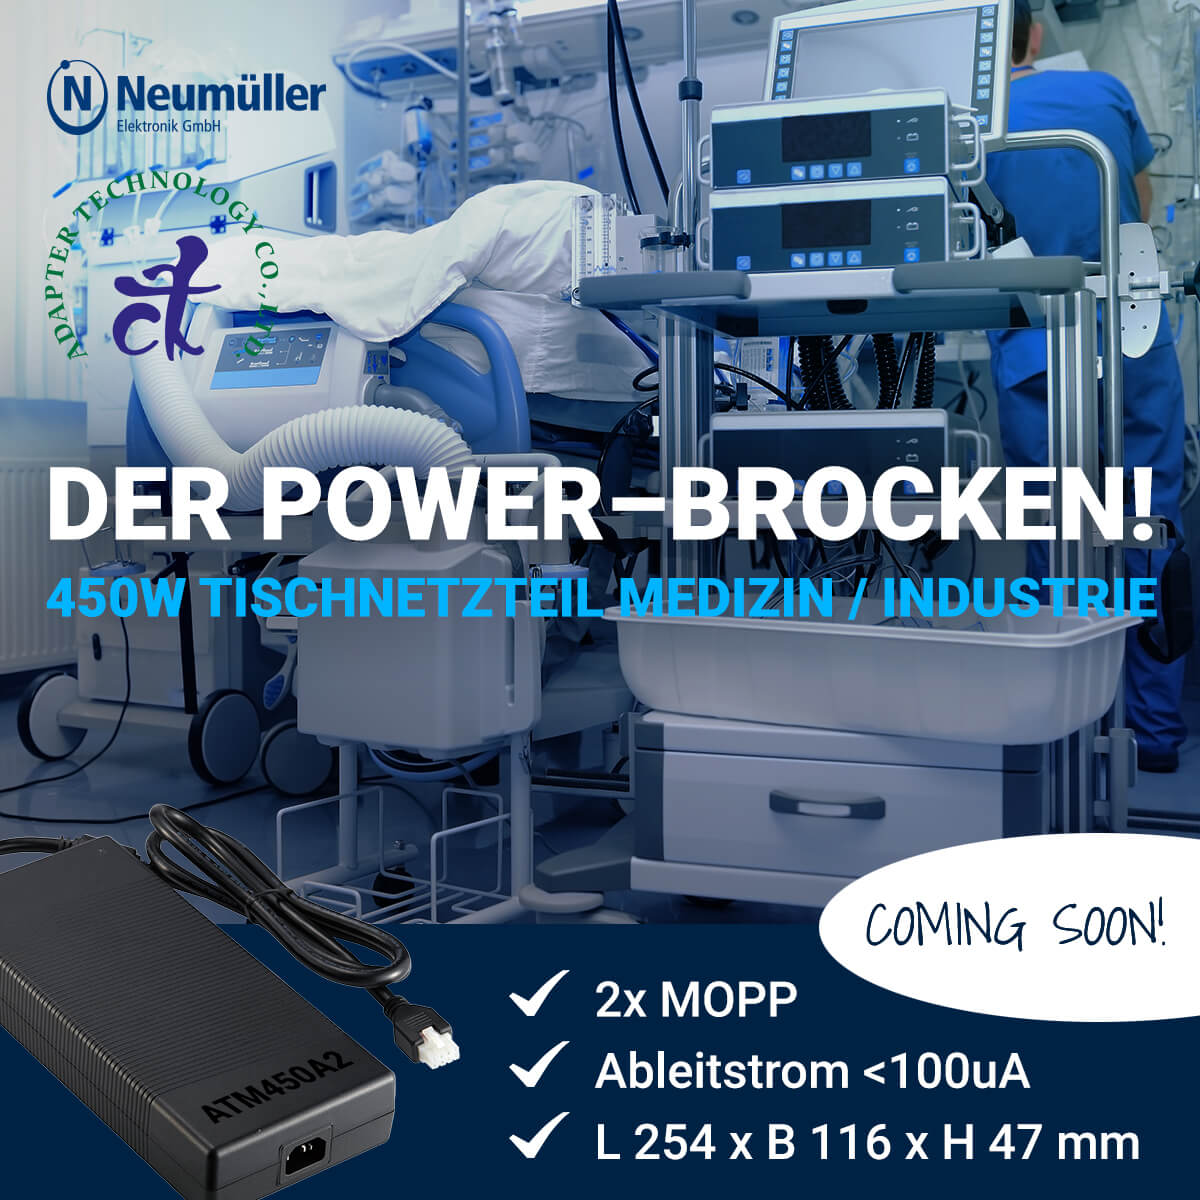 The power hunk: 450W desktop power supply for medicine and industry